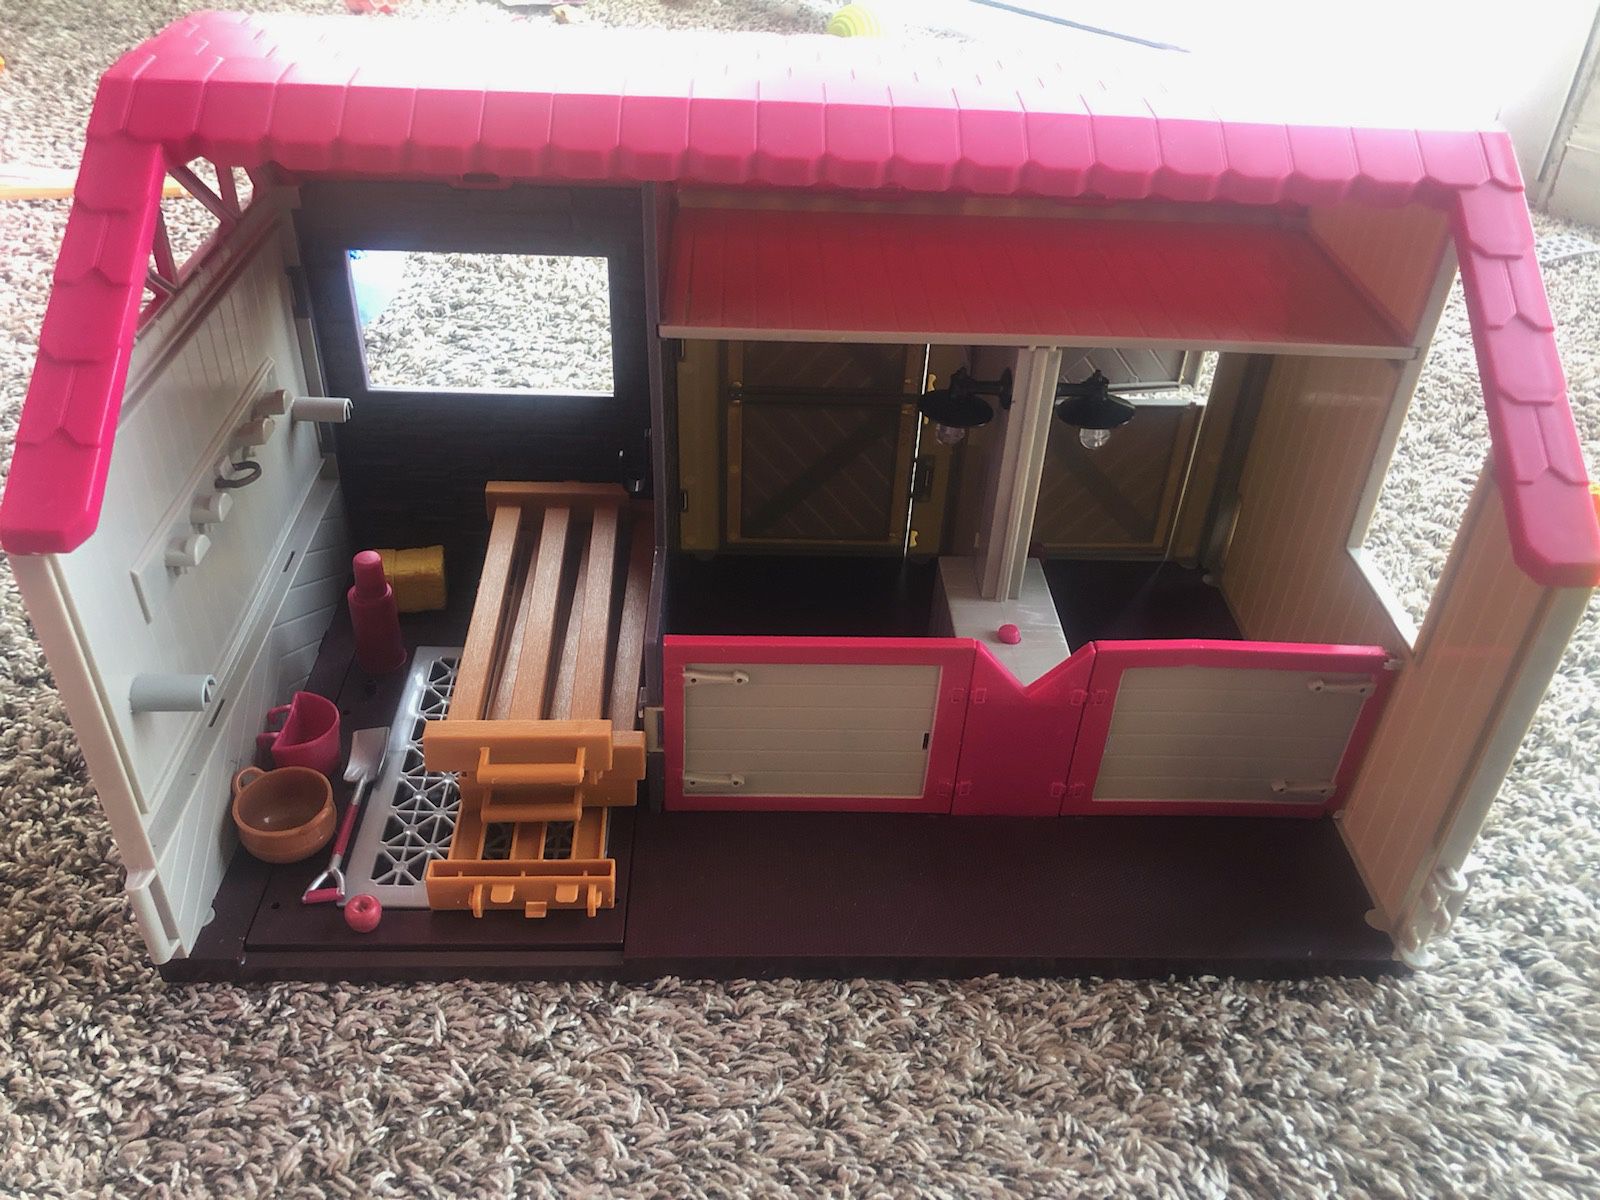 American doll toy house